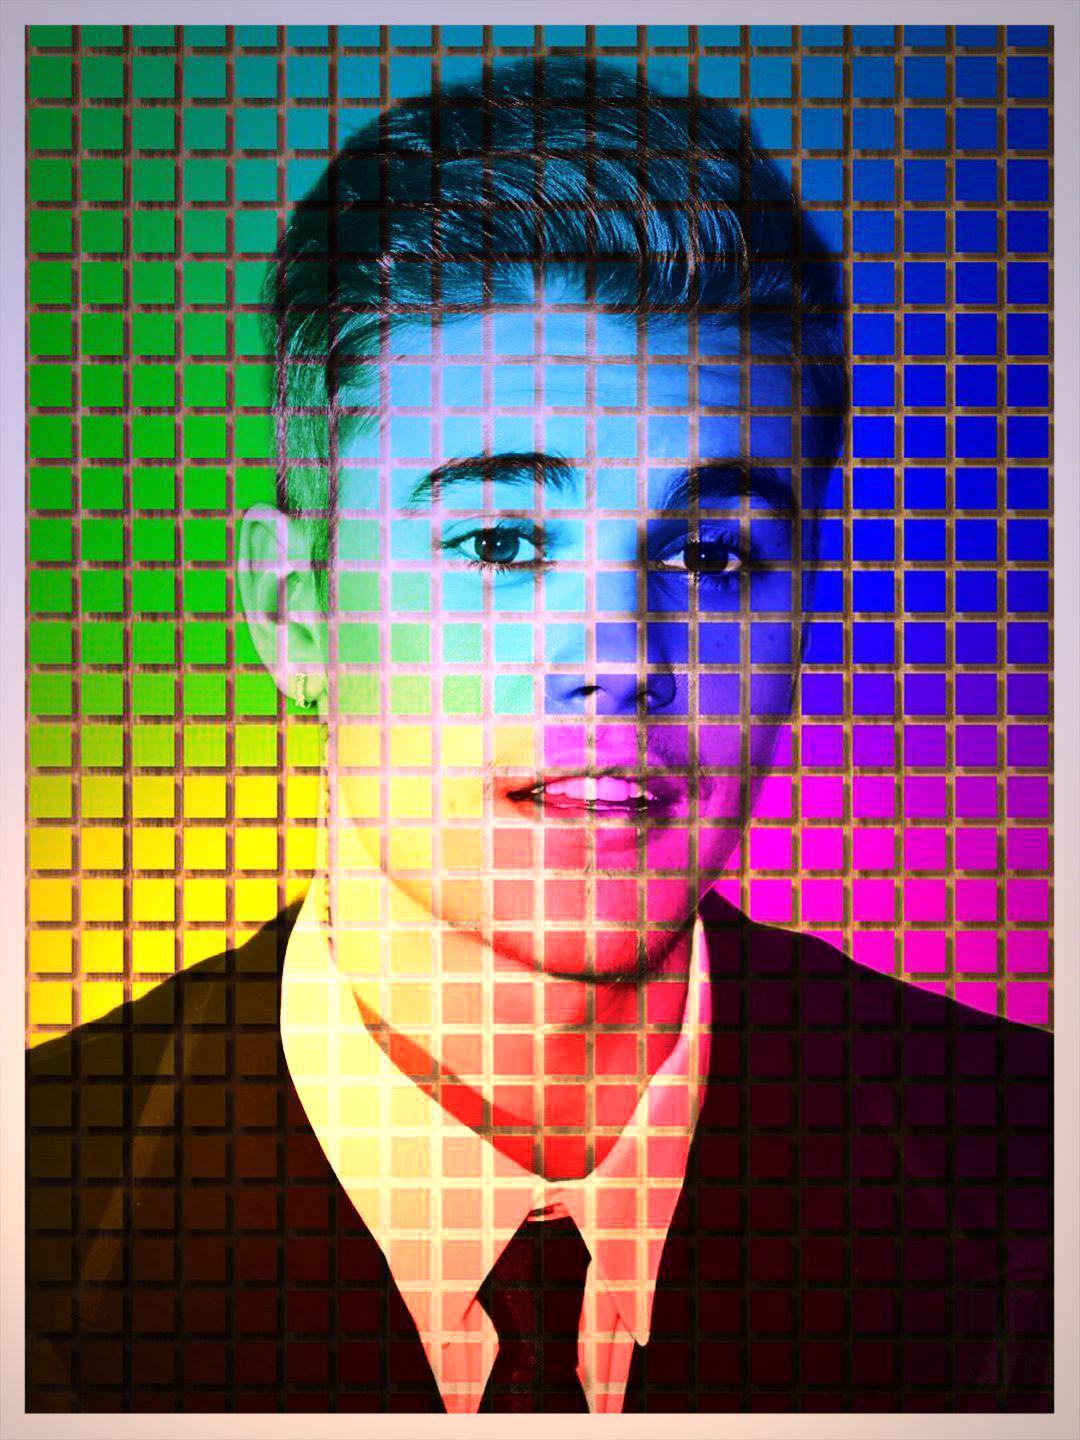 Bieber Brazil Tranny - Justin Bieber - Christmas Giveaway! - Celeb ART - Beautiful Artworks of  Celebrities, Footballers, Politicians and Famous People in World | OpenSea